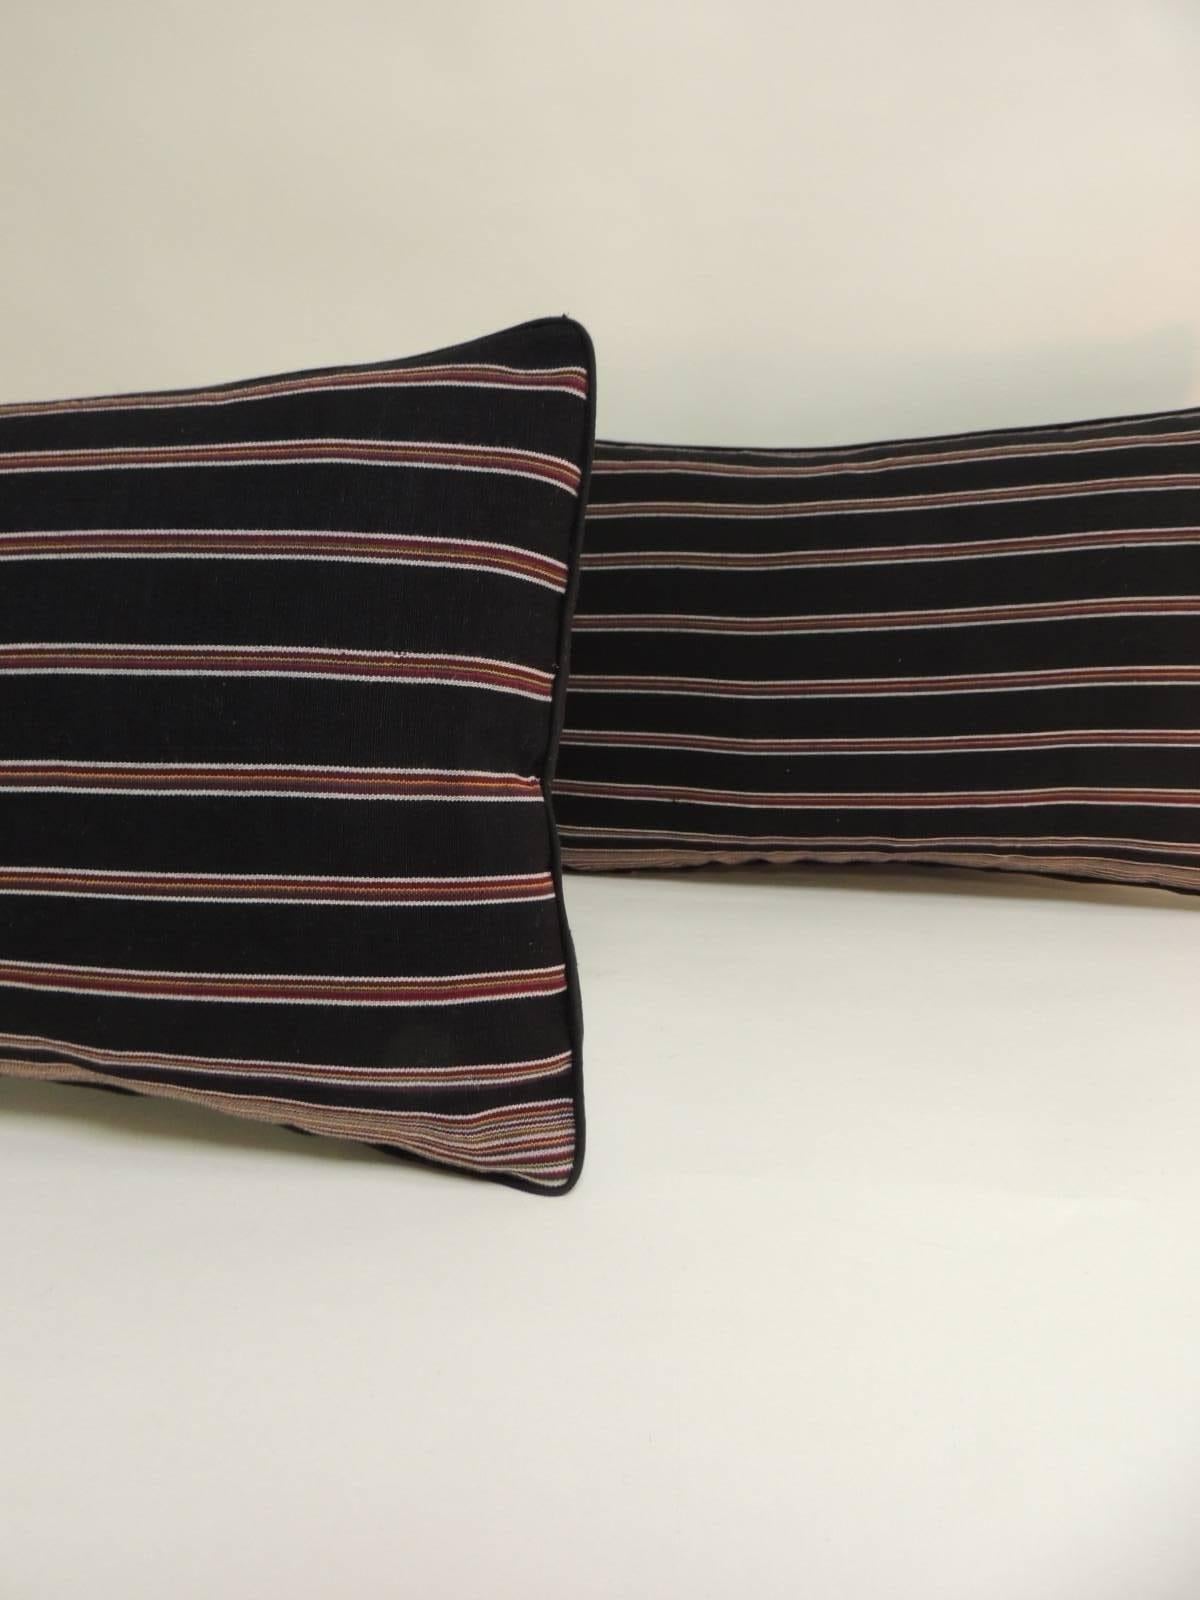 Japonisme Pair of Woven Obi Red and Black Stripes Lumbar Decorative Pillows